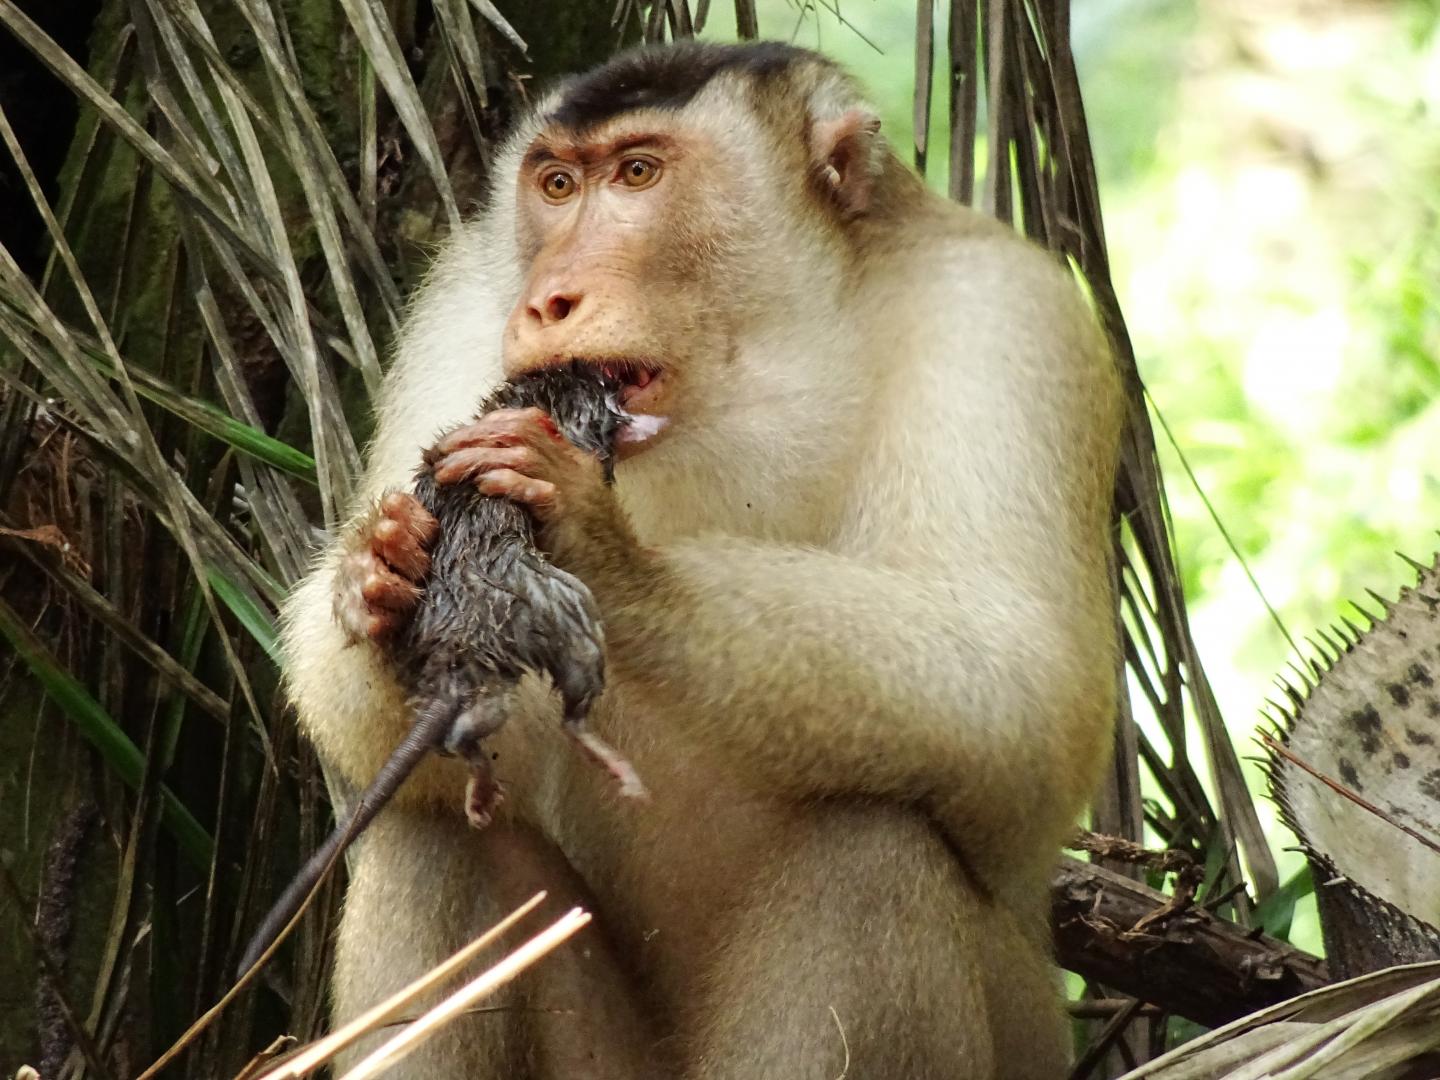 Adult Male Pig-Tailed Macaque Consuming a Rat at the Oil Palm Plantations